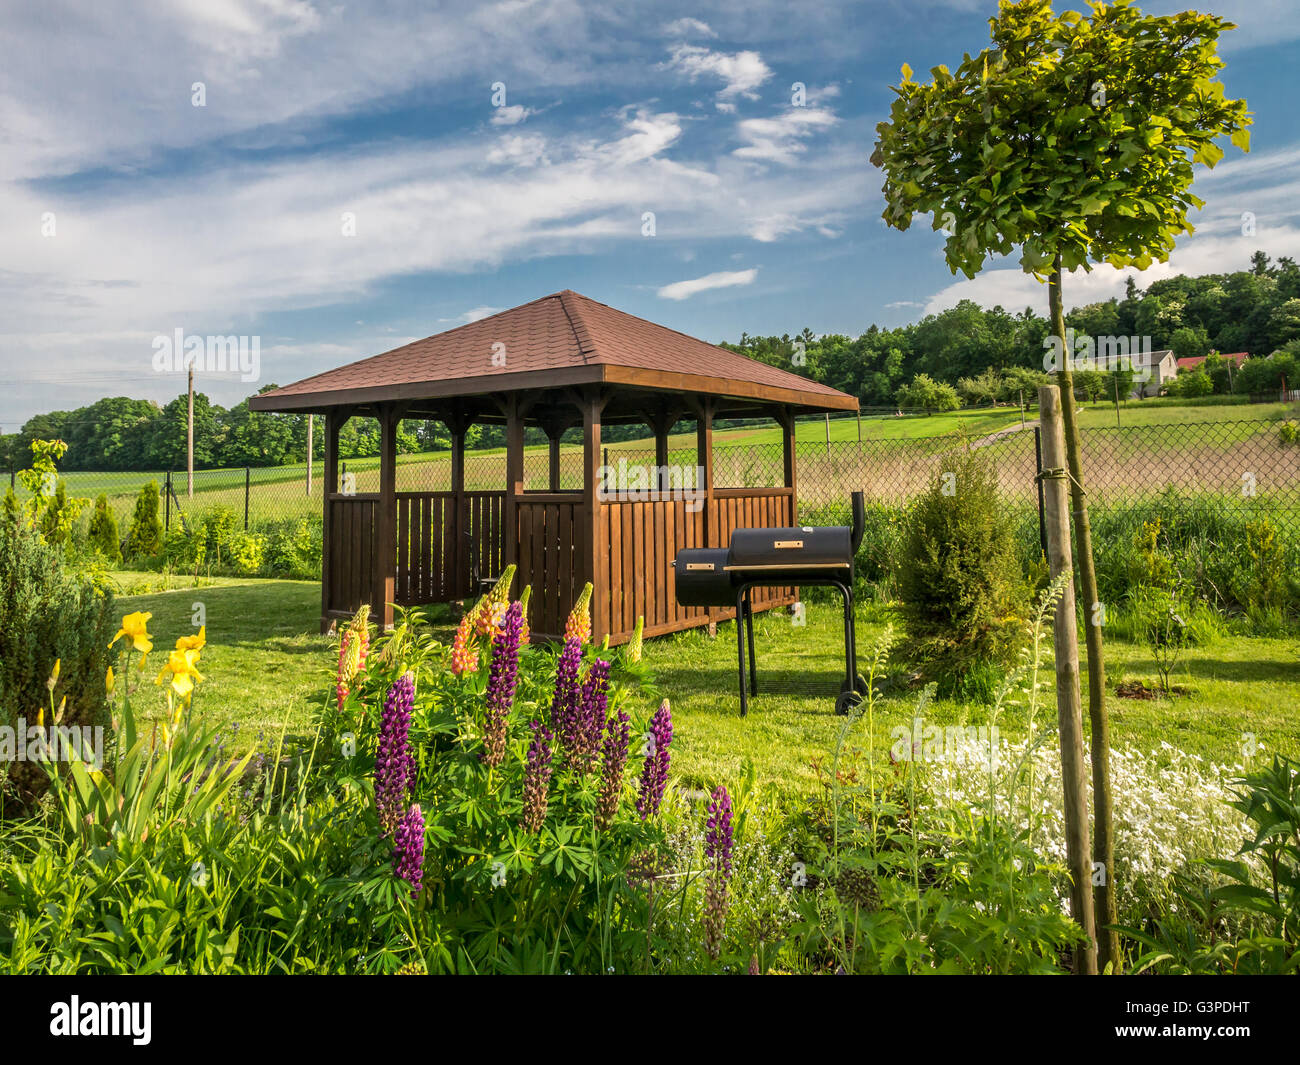 Wooden summer house with grill in the backyard Stock Photo